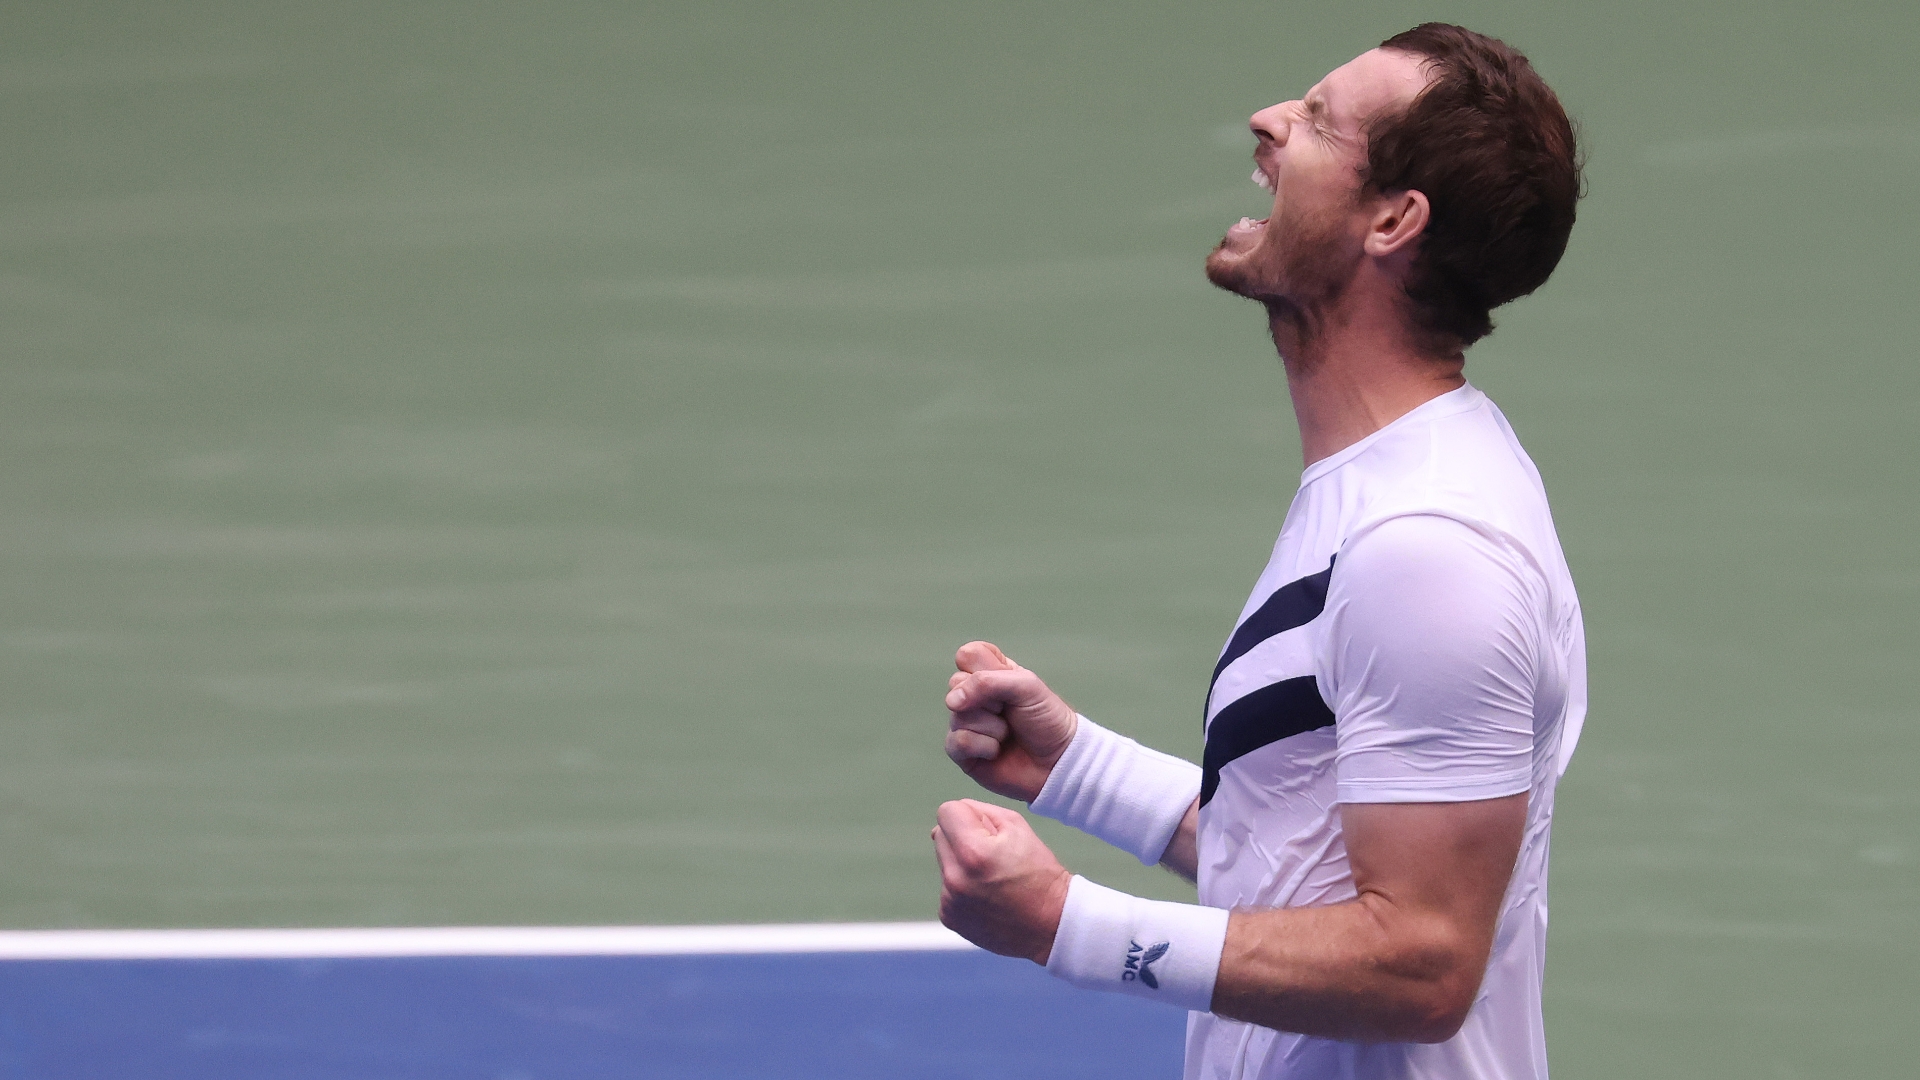 Andy Murray completes comeback in Round 1 of US Open